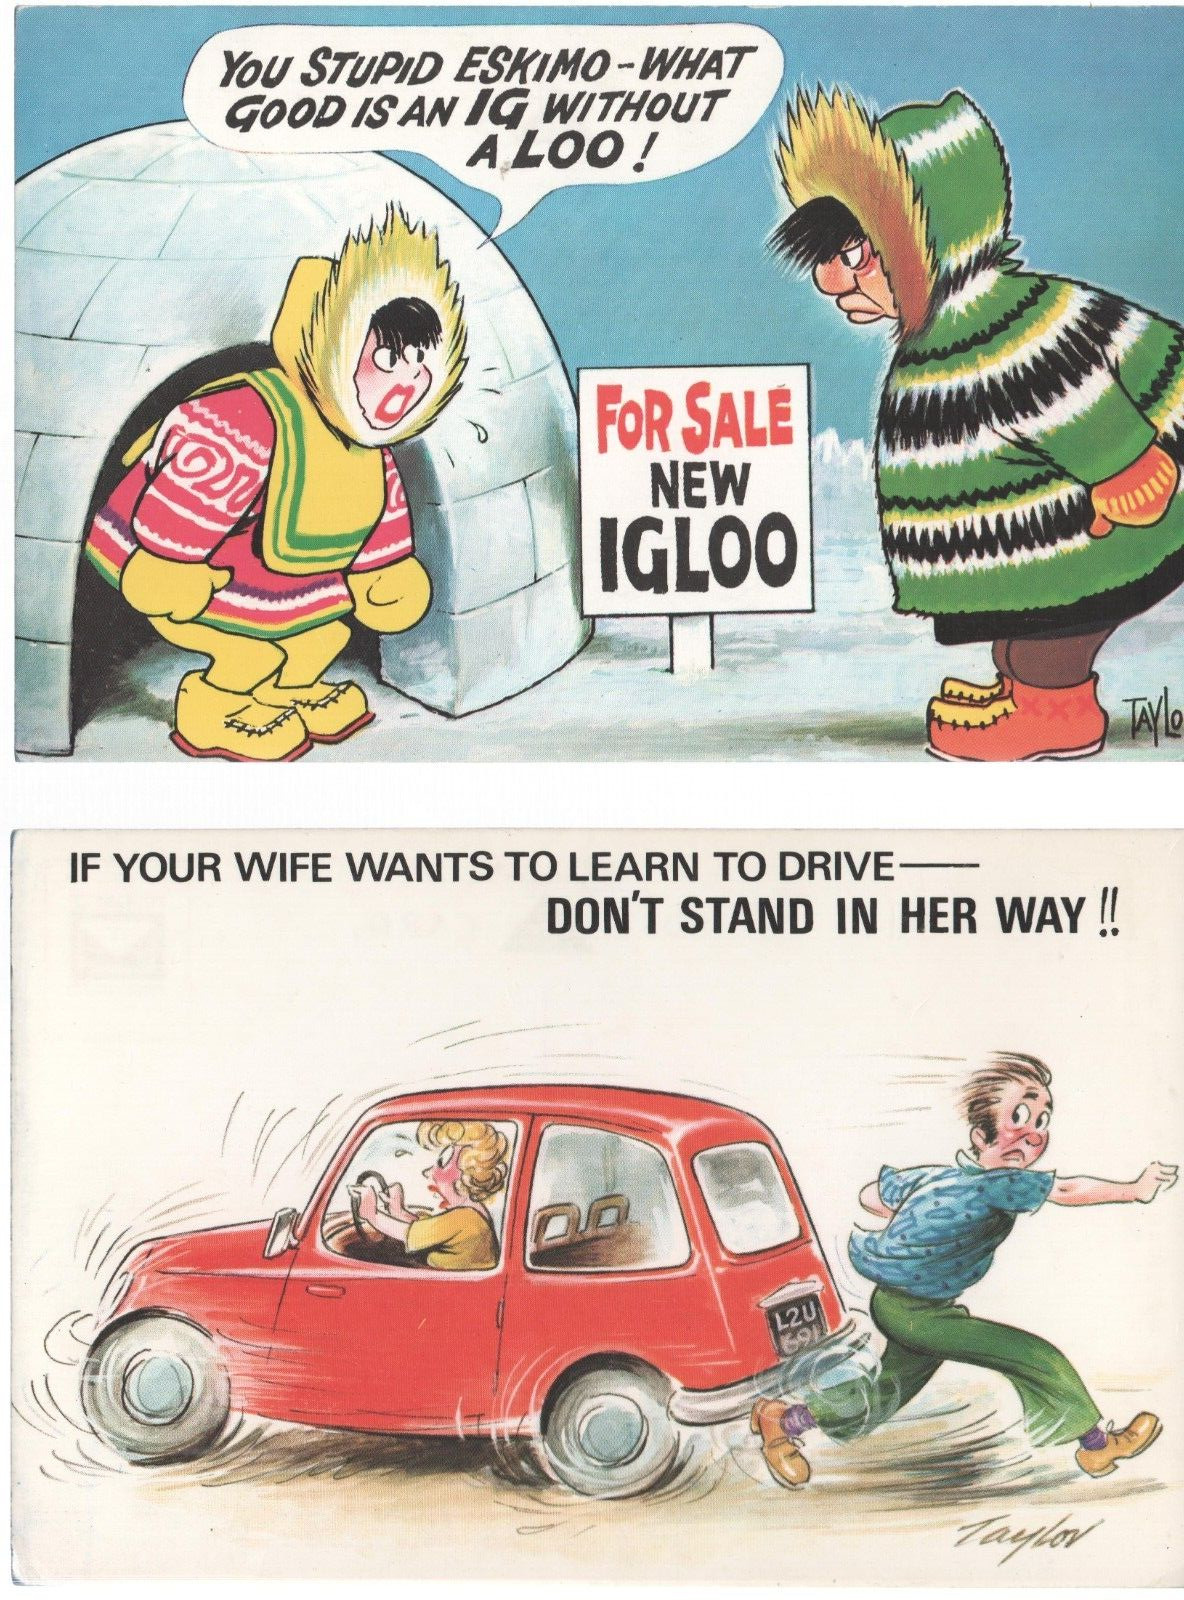 Lot of 6 British Humor Postcards c1980s Unposted Funny, Igloo Driving Frog